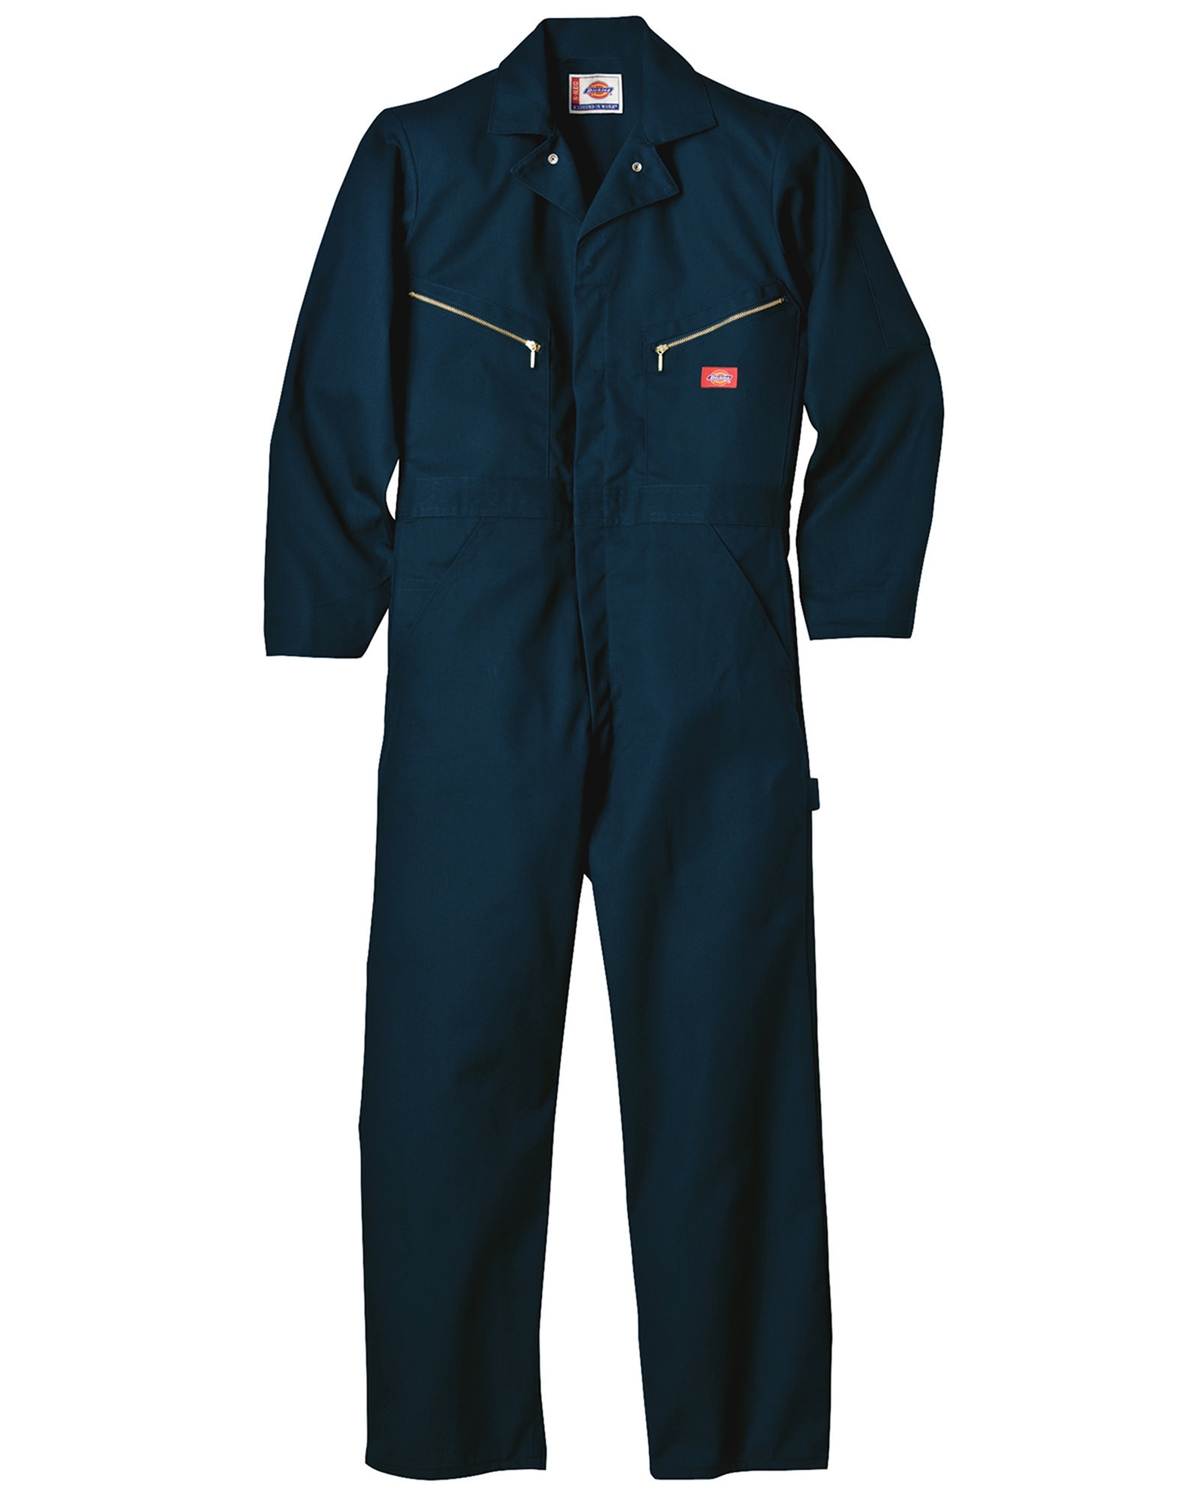 48799 Dickies 7.5 oz. Deluxe Coverall - Blended